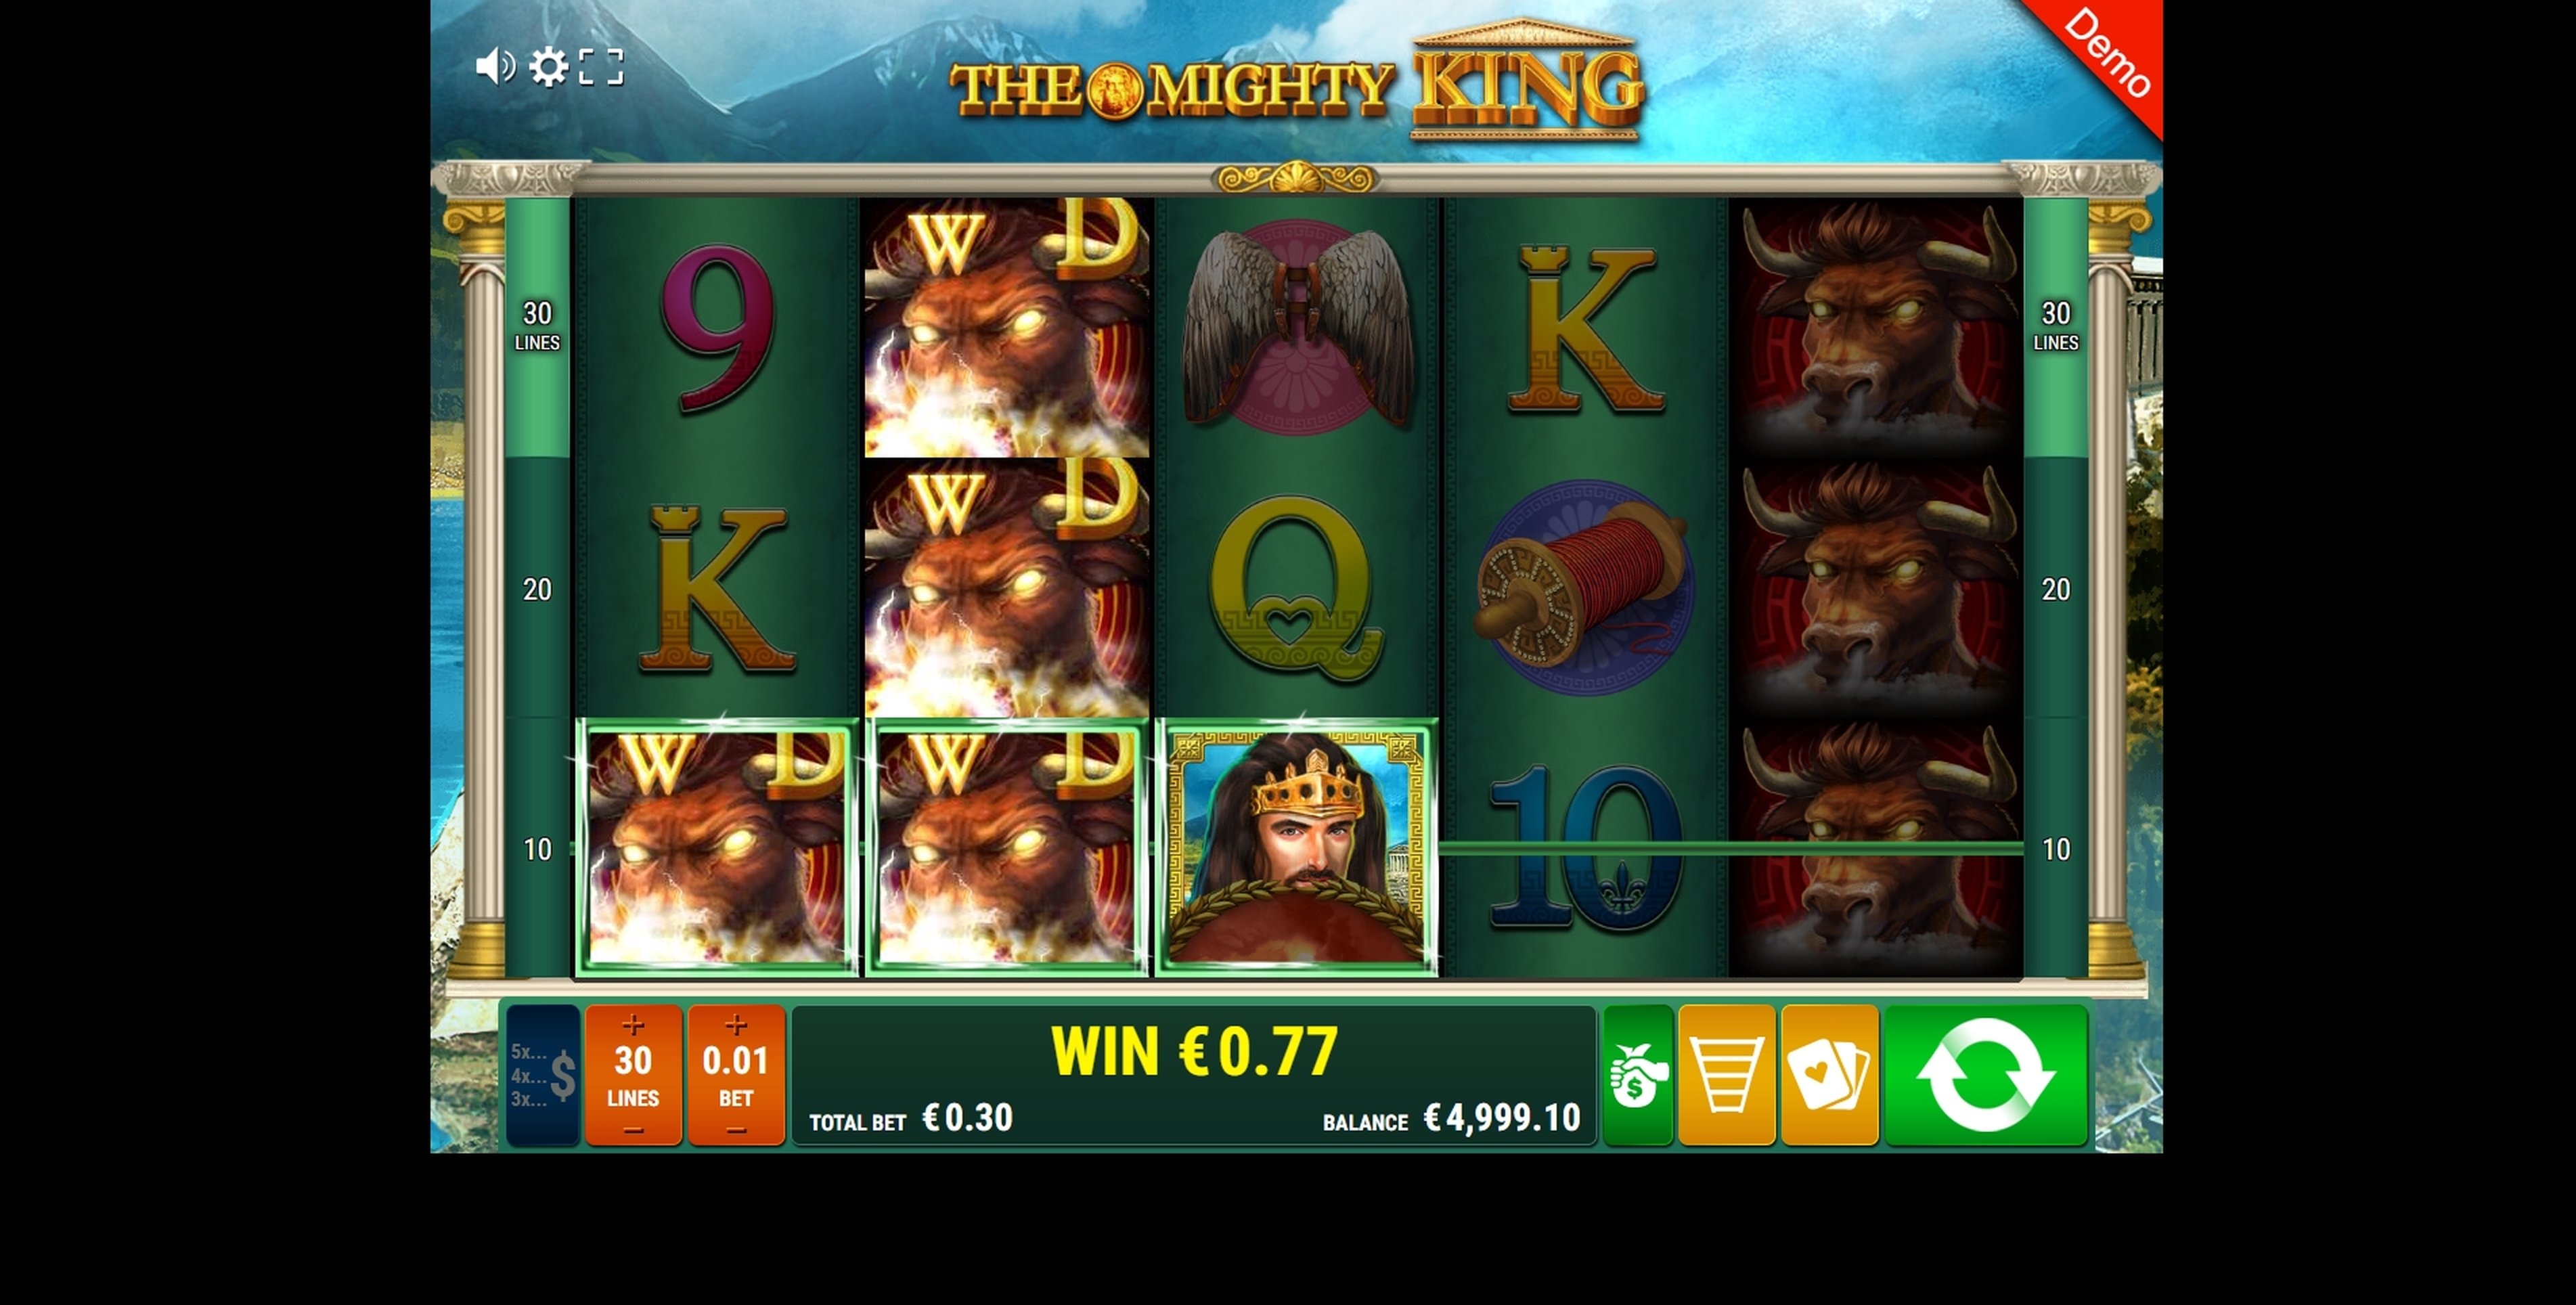 Win Money in The Mighty King Free Slot Game by Bally Wulff